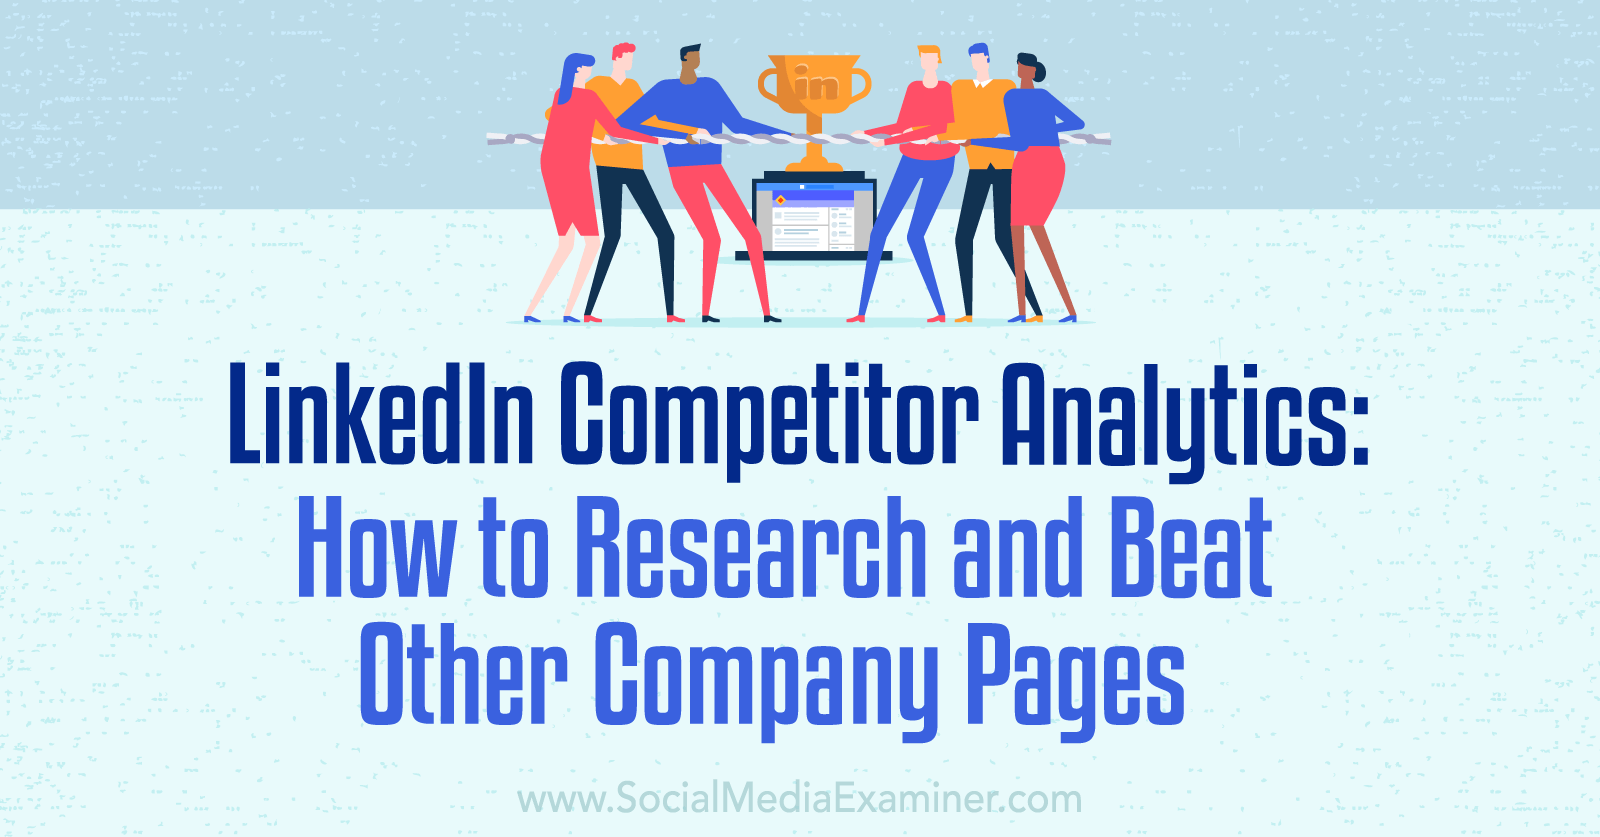 LinkedIn Competitor Analytics: How to Research and Beat Other Company Pages by Social Media Examiner